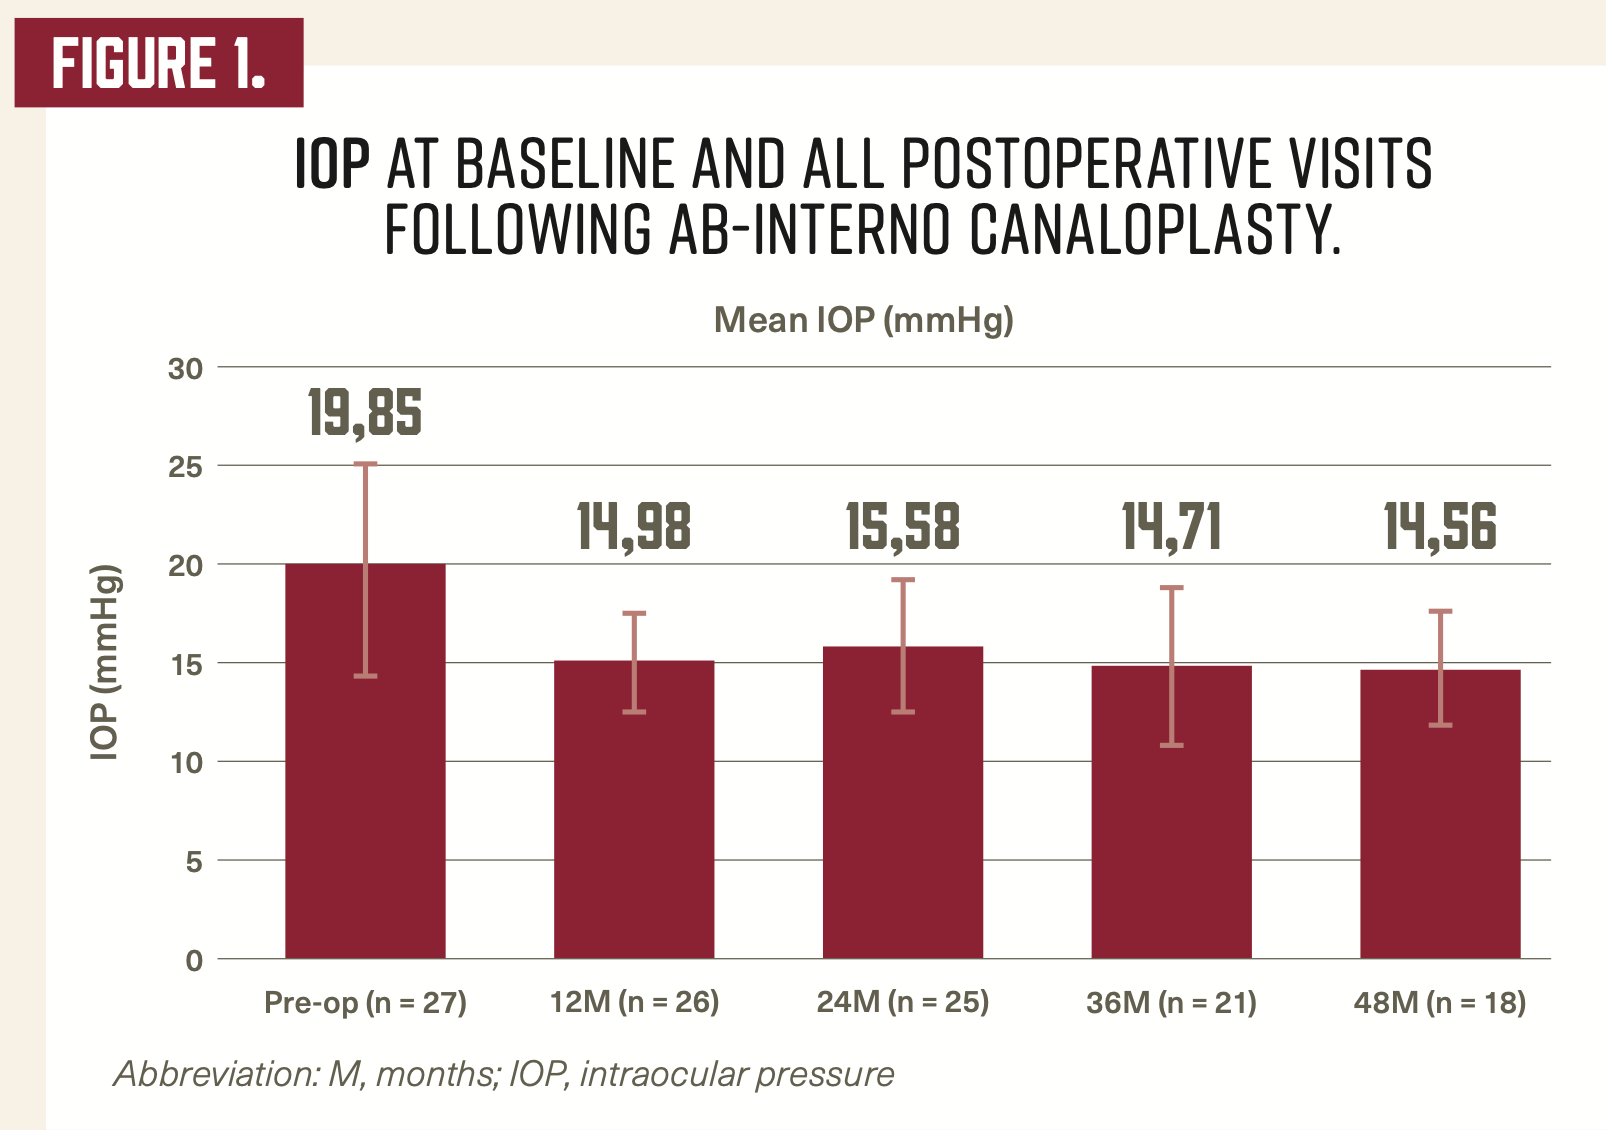 Figure 1: IOP at baseline and all postoperative visits following ab-interno canaloplasty.